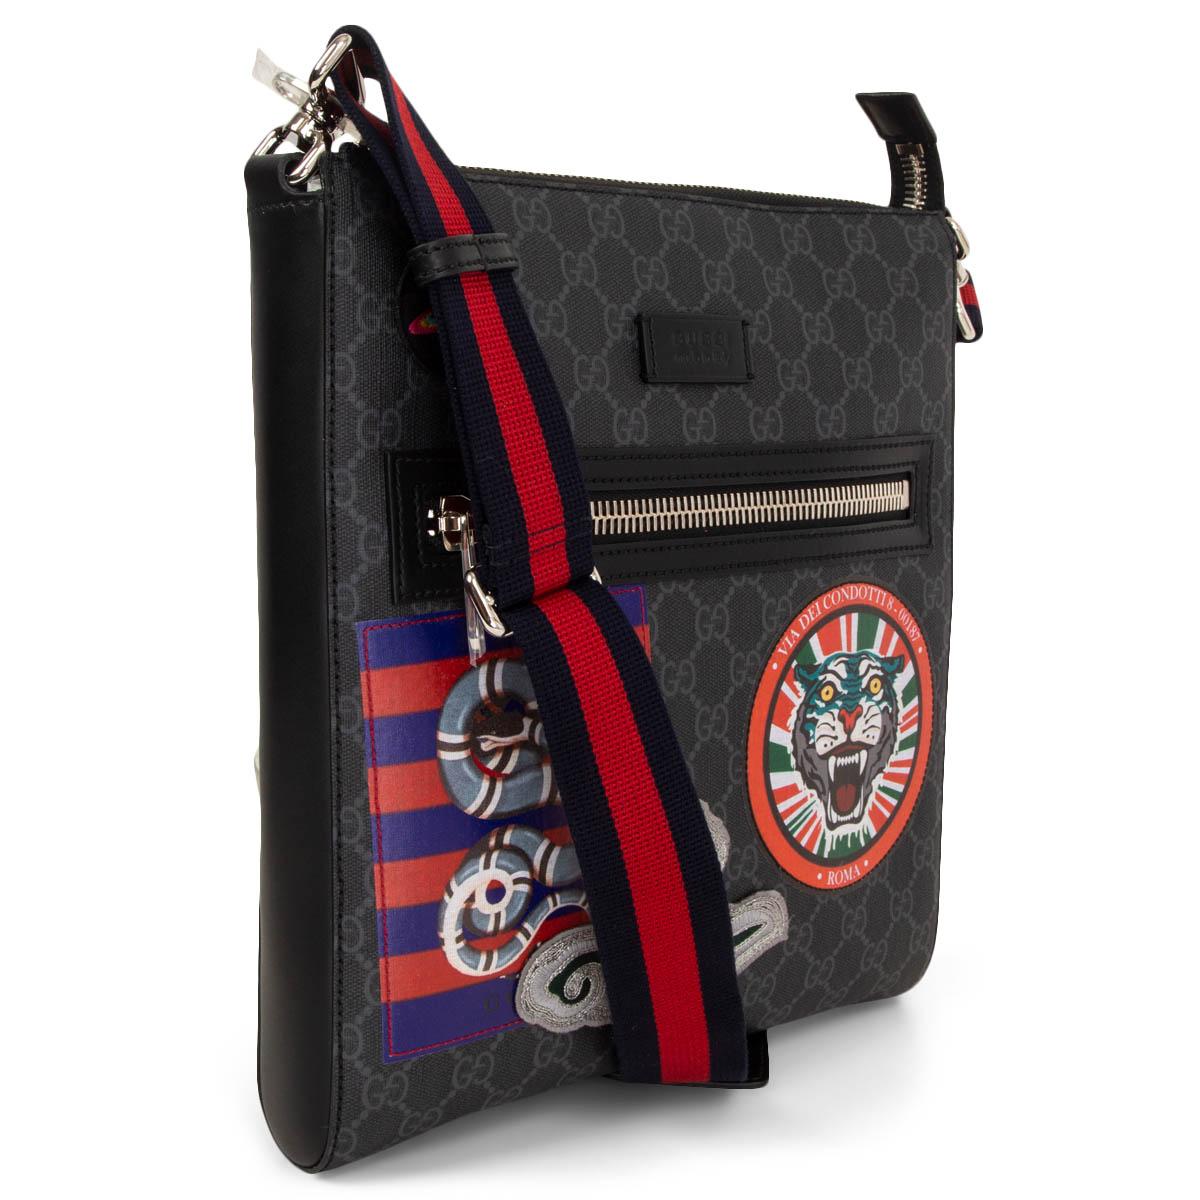 100% authentic Gucci Night Courrier GG Supreme Messenger shoulder bag in black and grey coated GG canvas and black leather trimming. Fastened with a zipper on top. Zip pocket and colourful patches at front. Adjustable shoulder strap with signature